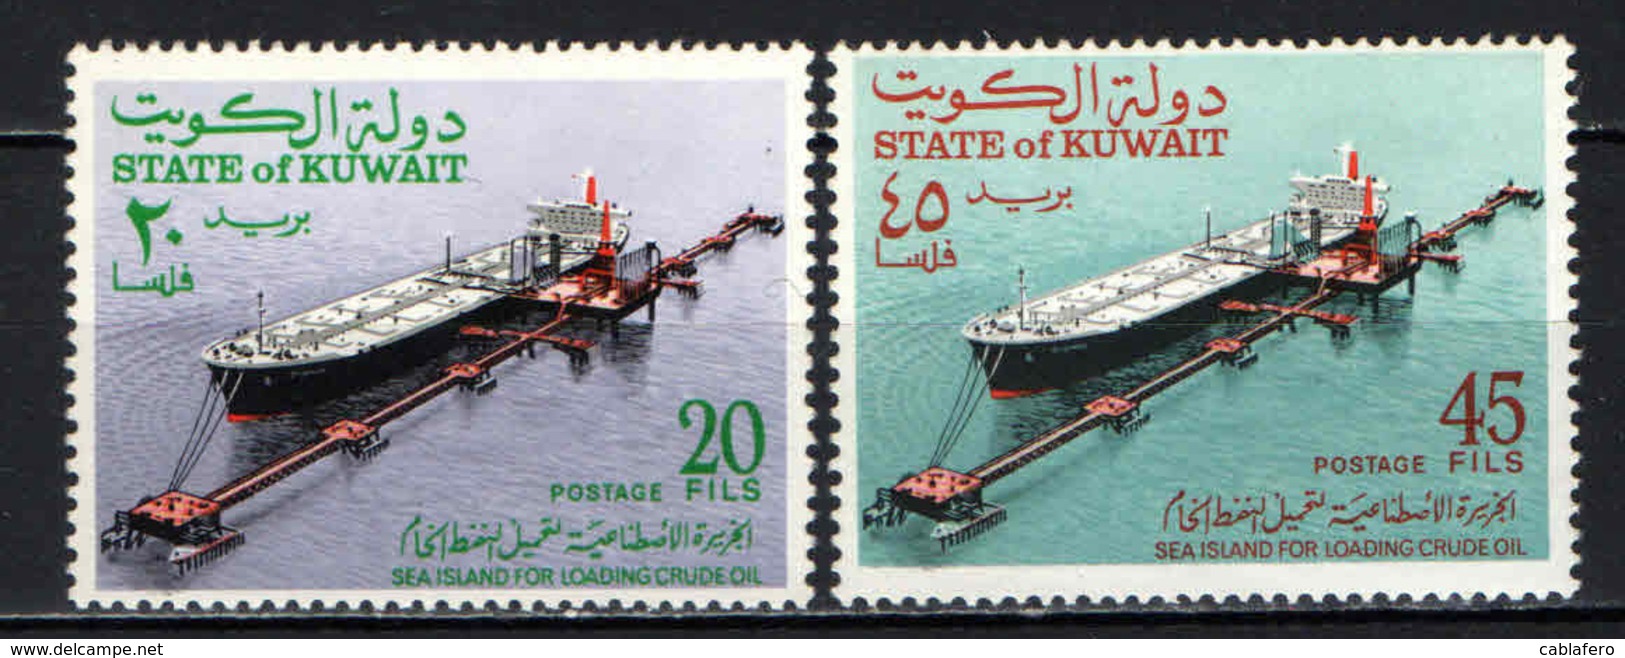 KUWAIT - 1970 - Issued To Publicize The Artificial “Sea Island” Loading Facilities In Kuwait - MNH - Kuwait